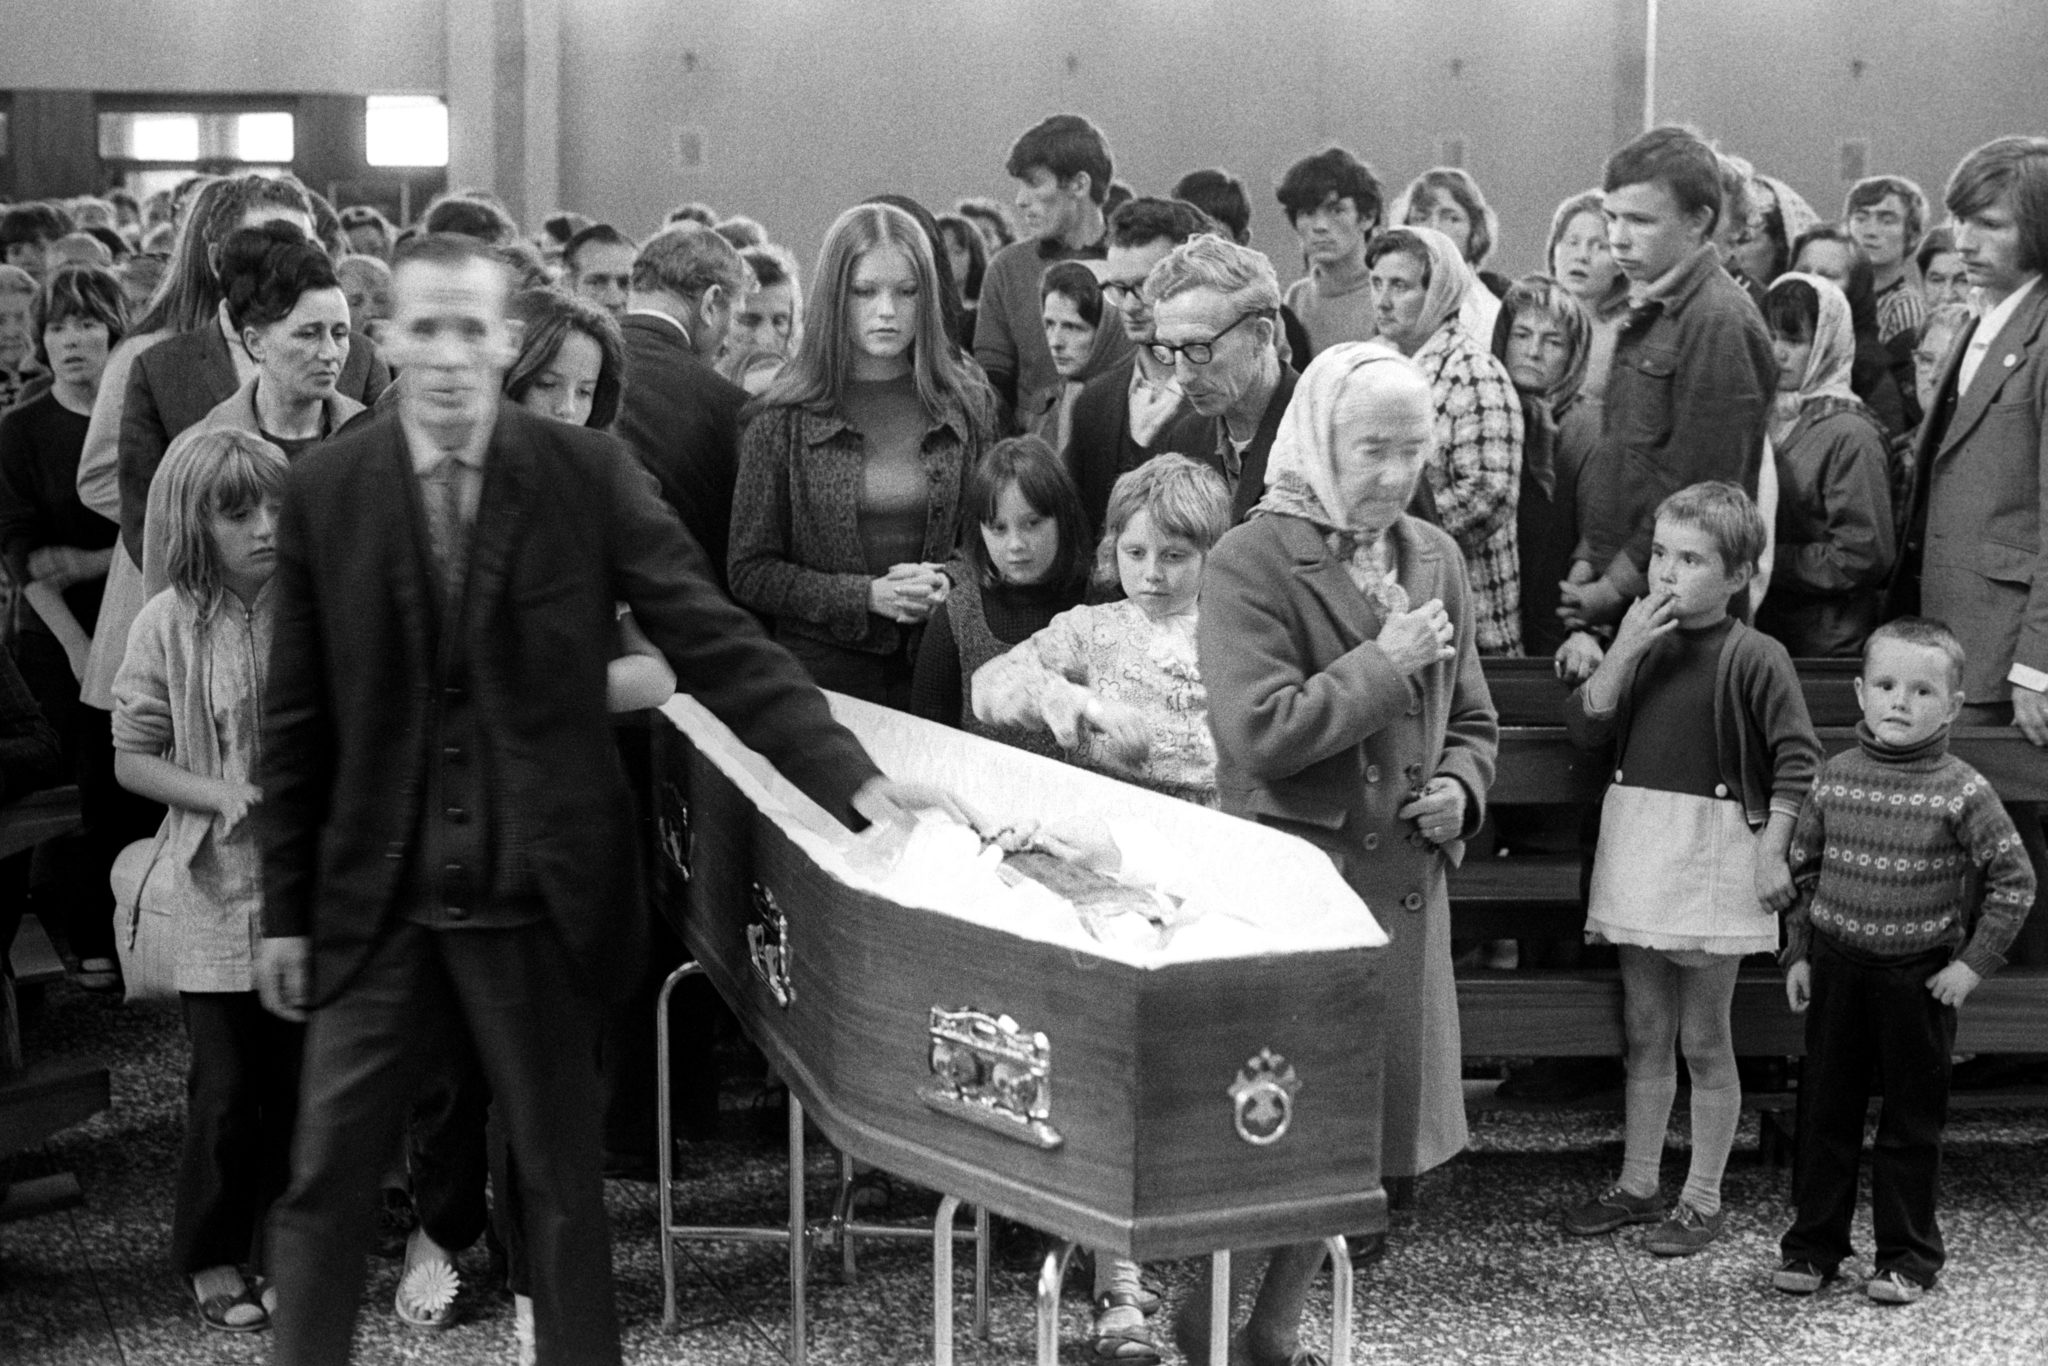 Mourners file past the coffin of Fr Hugh Mullan, at Corpus Christi Roman Catholic Church on the Ballymurphy estate in Belfast, on August 11th 1971. He was killed after attempting to give last rites to a wounded parishioner. 